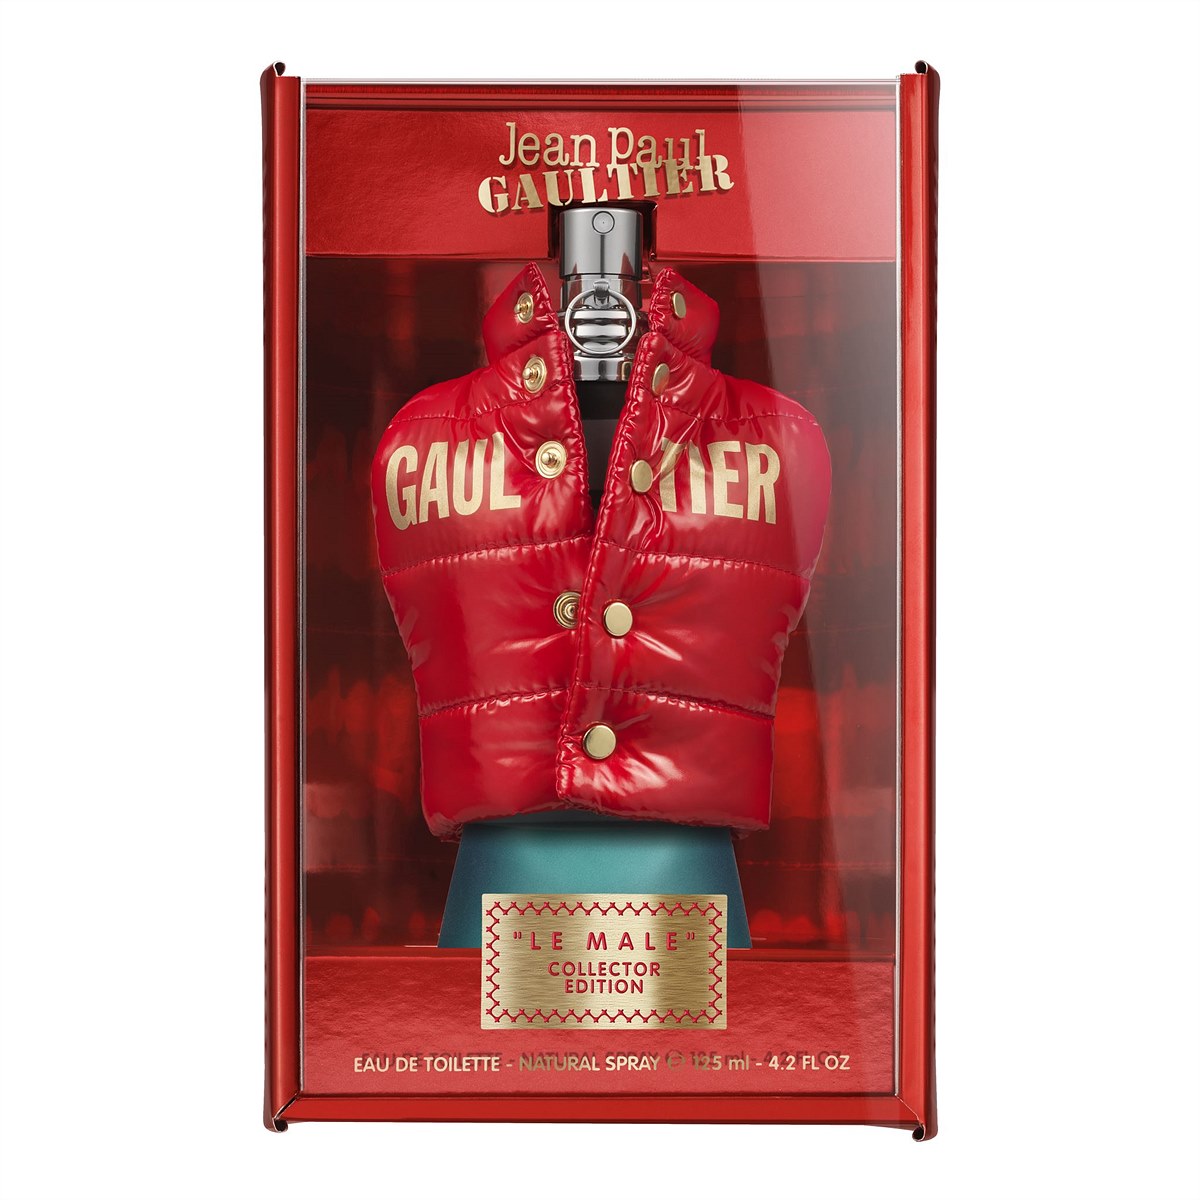 Jean Paul Gaultier_Le Male EdT_X-Mas Collector_125ml_UVP € 100,00_Freisteller mit Umverpackung